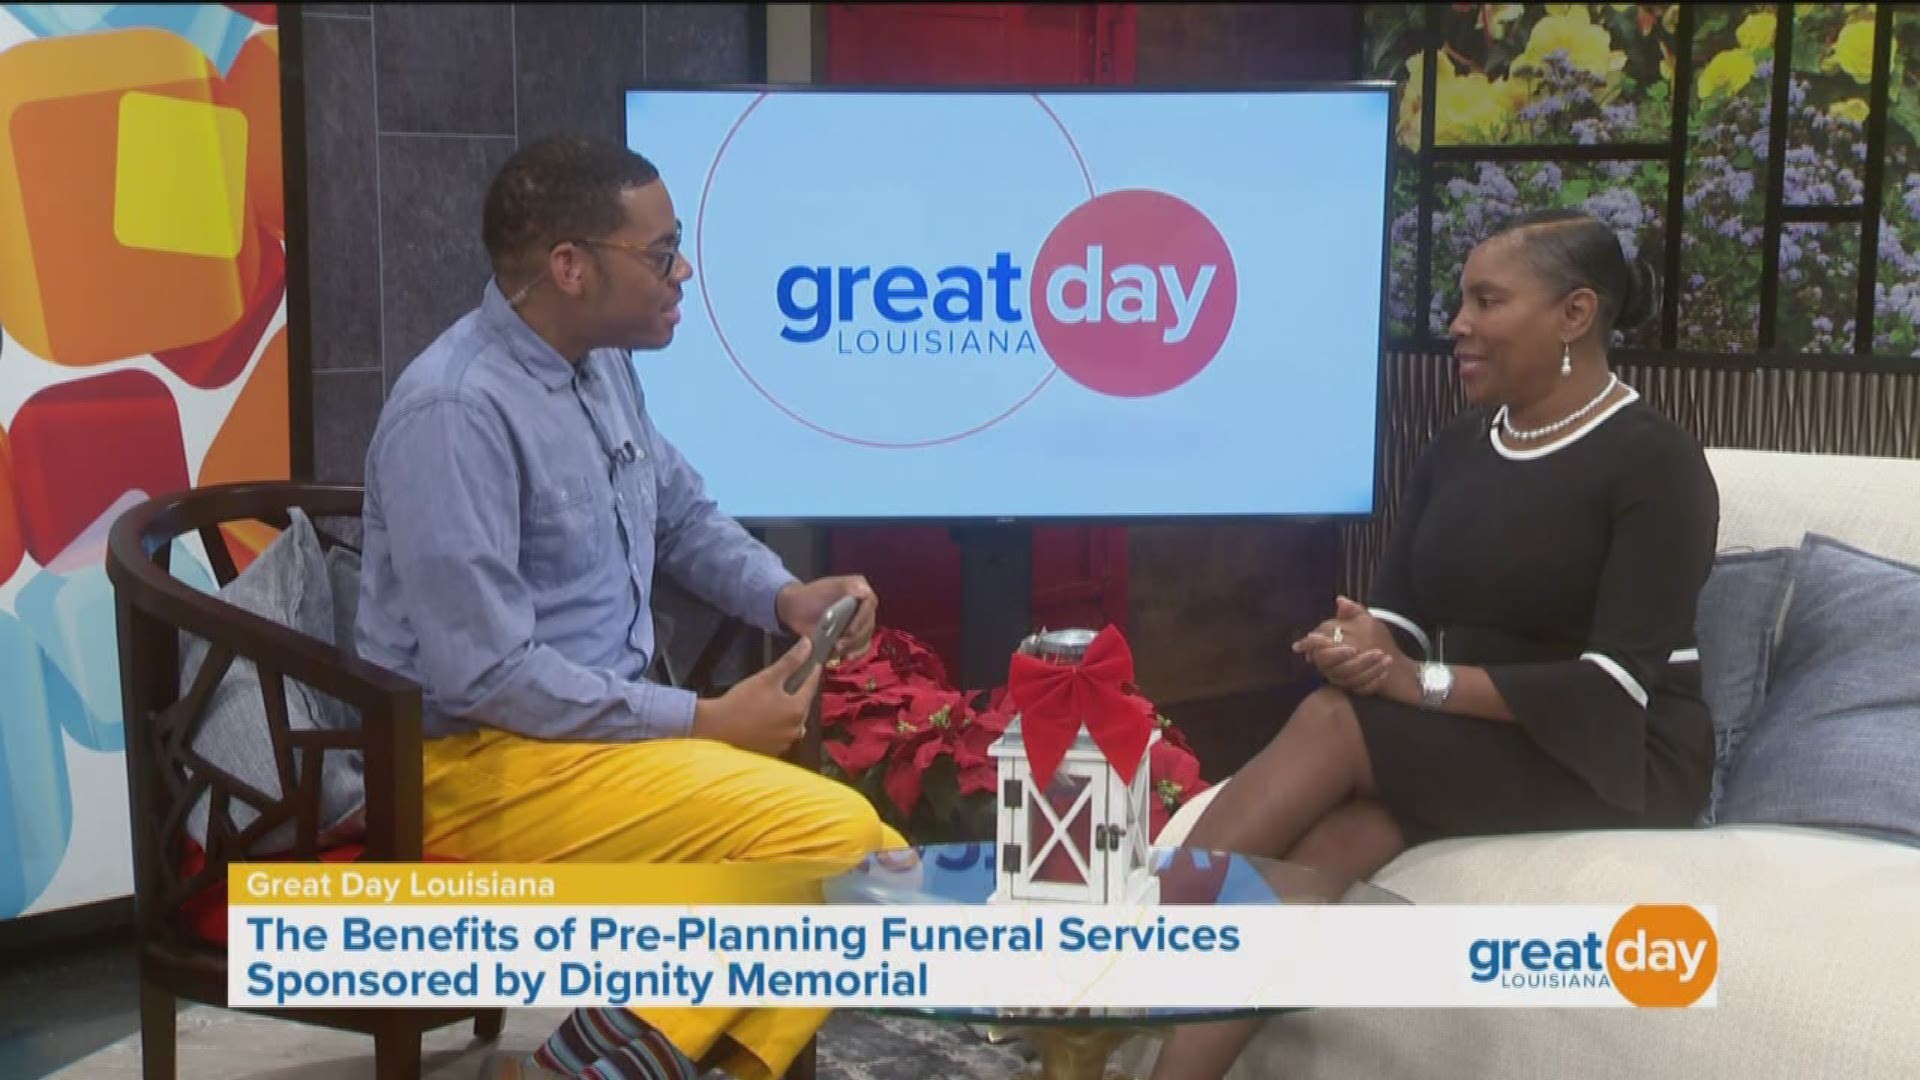 Dewanna McKinley, Sales Manager at Mt. Olivet Cemetery, advises the importance of pre-planning your funeral arrangements.